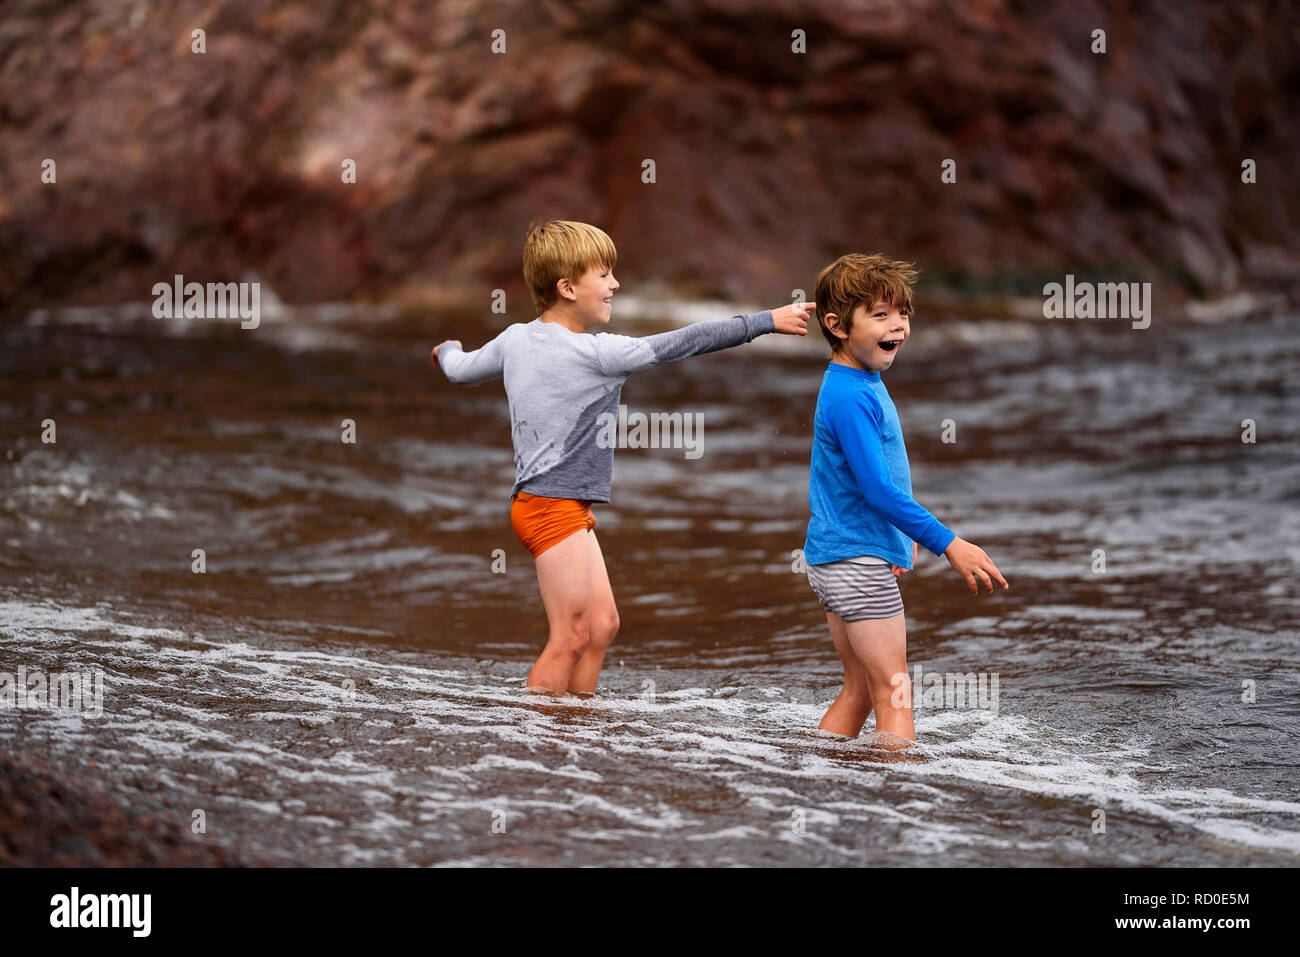 Two boys standing knee deep in the sea having fun, United States Stock Photo